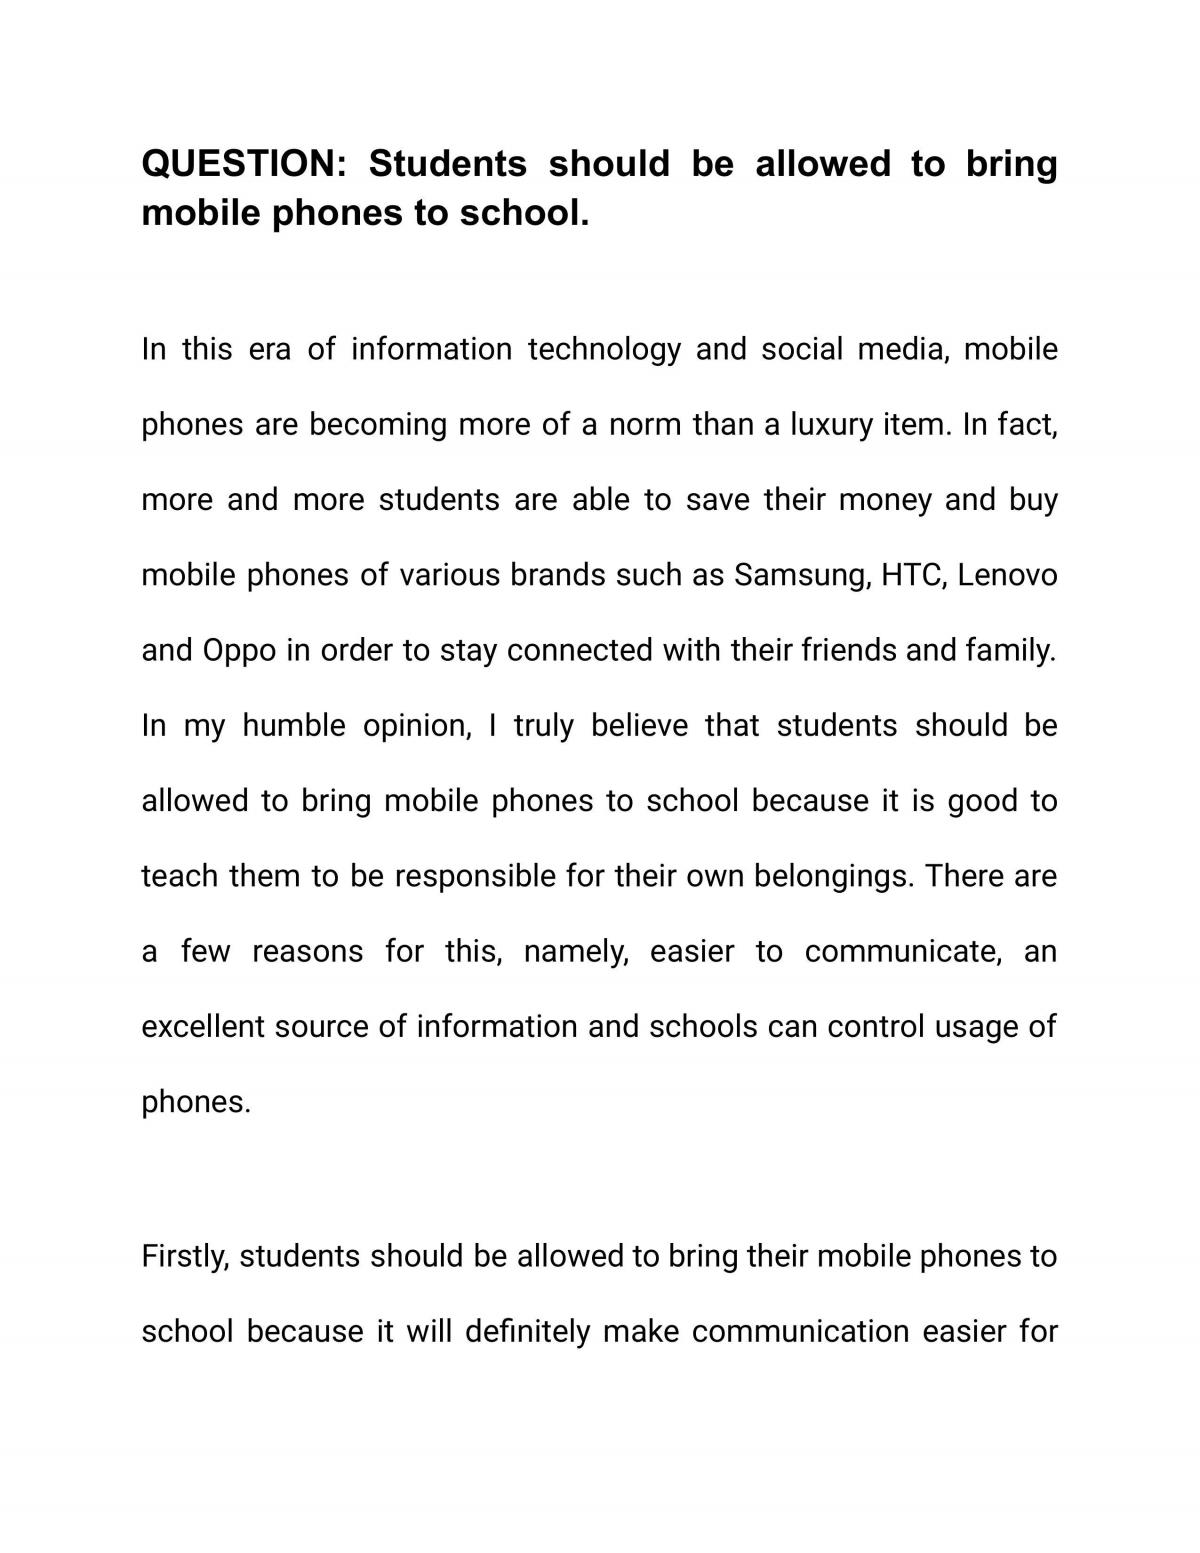 speech about cell phones should be allowed in schools